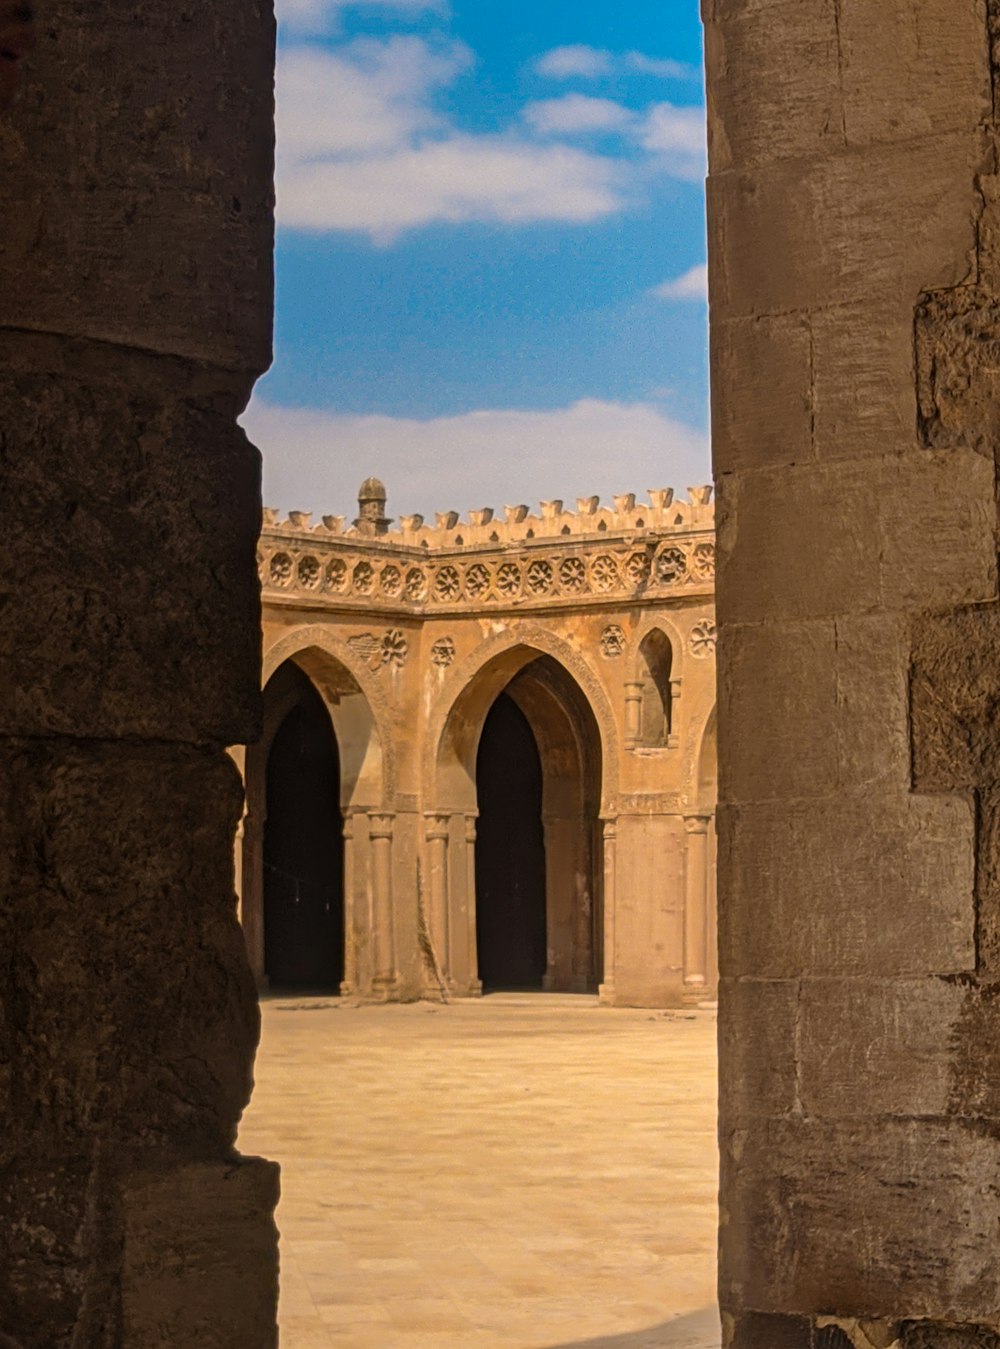 a view of a courtyard through two stone pillars